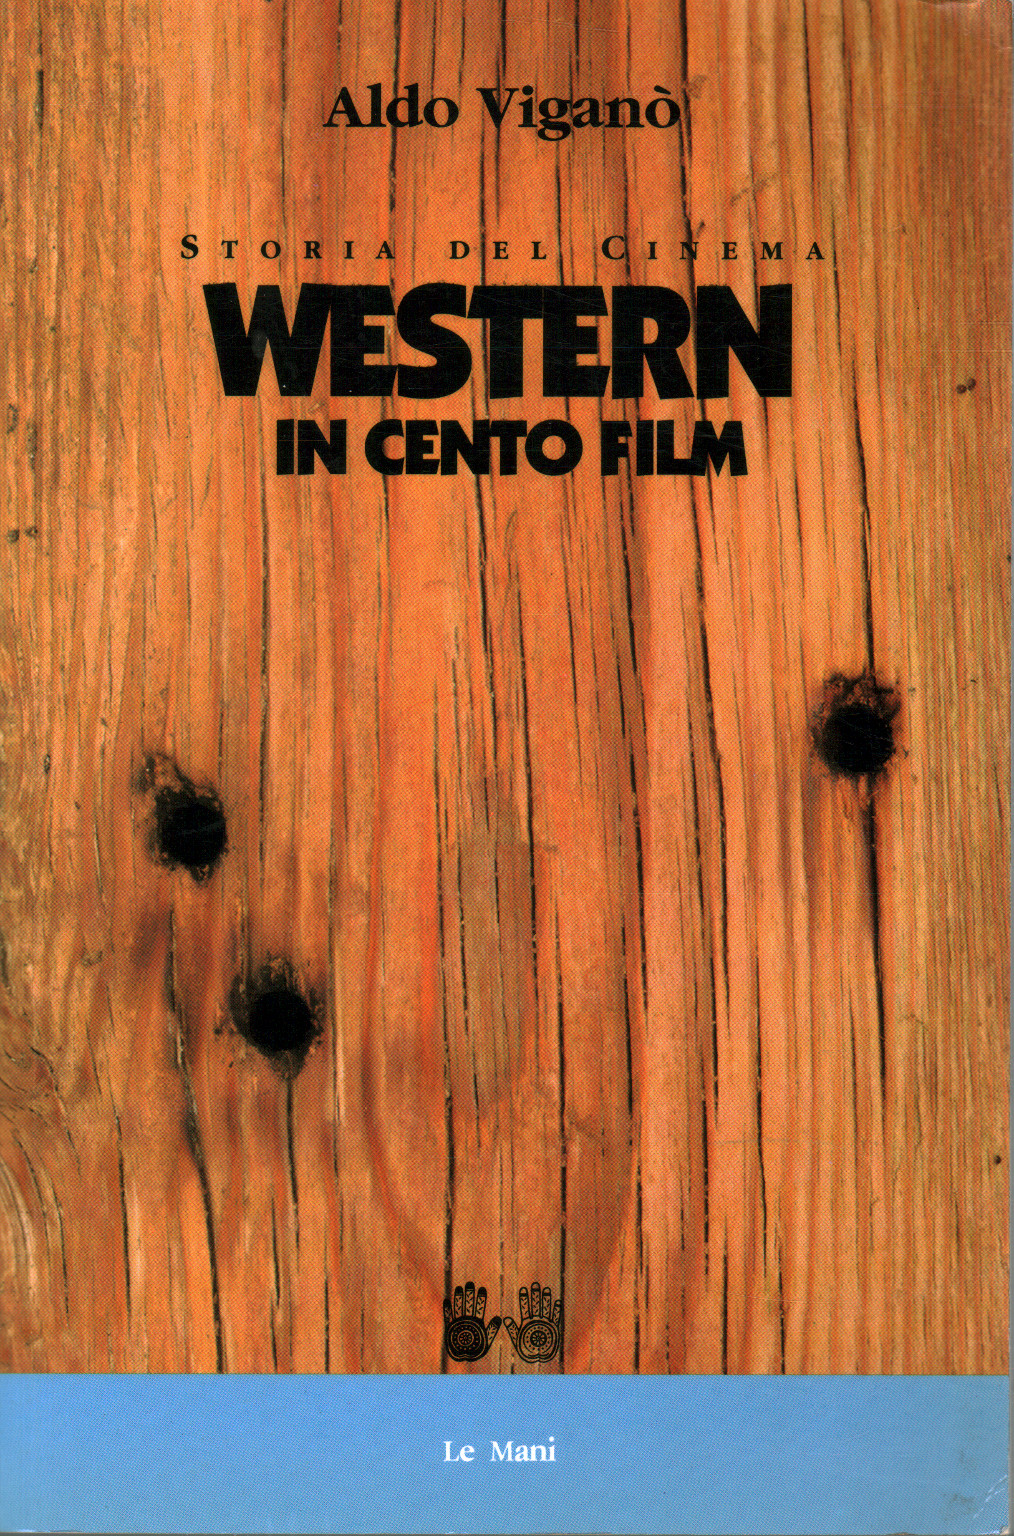 Western in cento film, s.a.